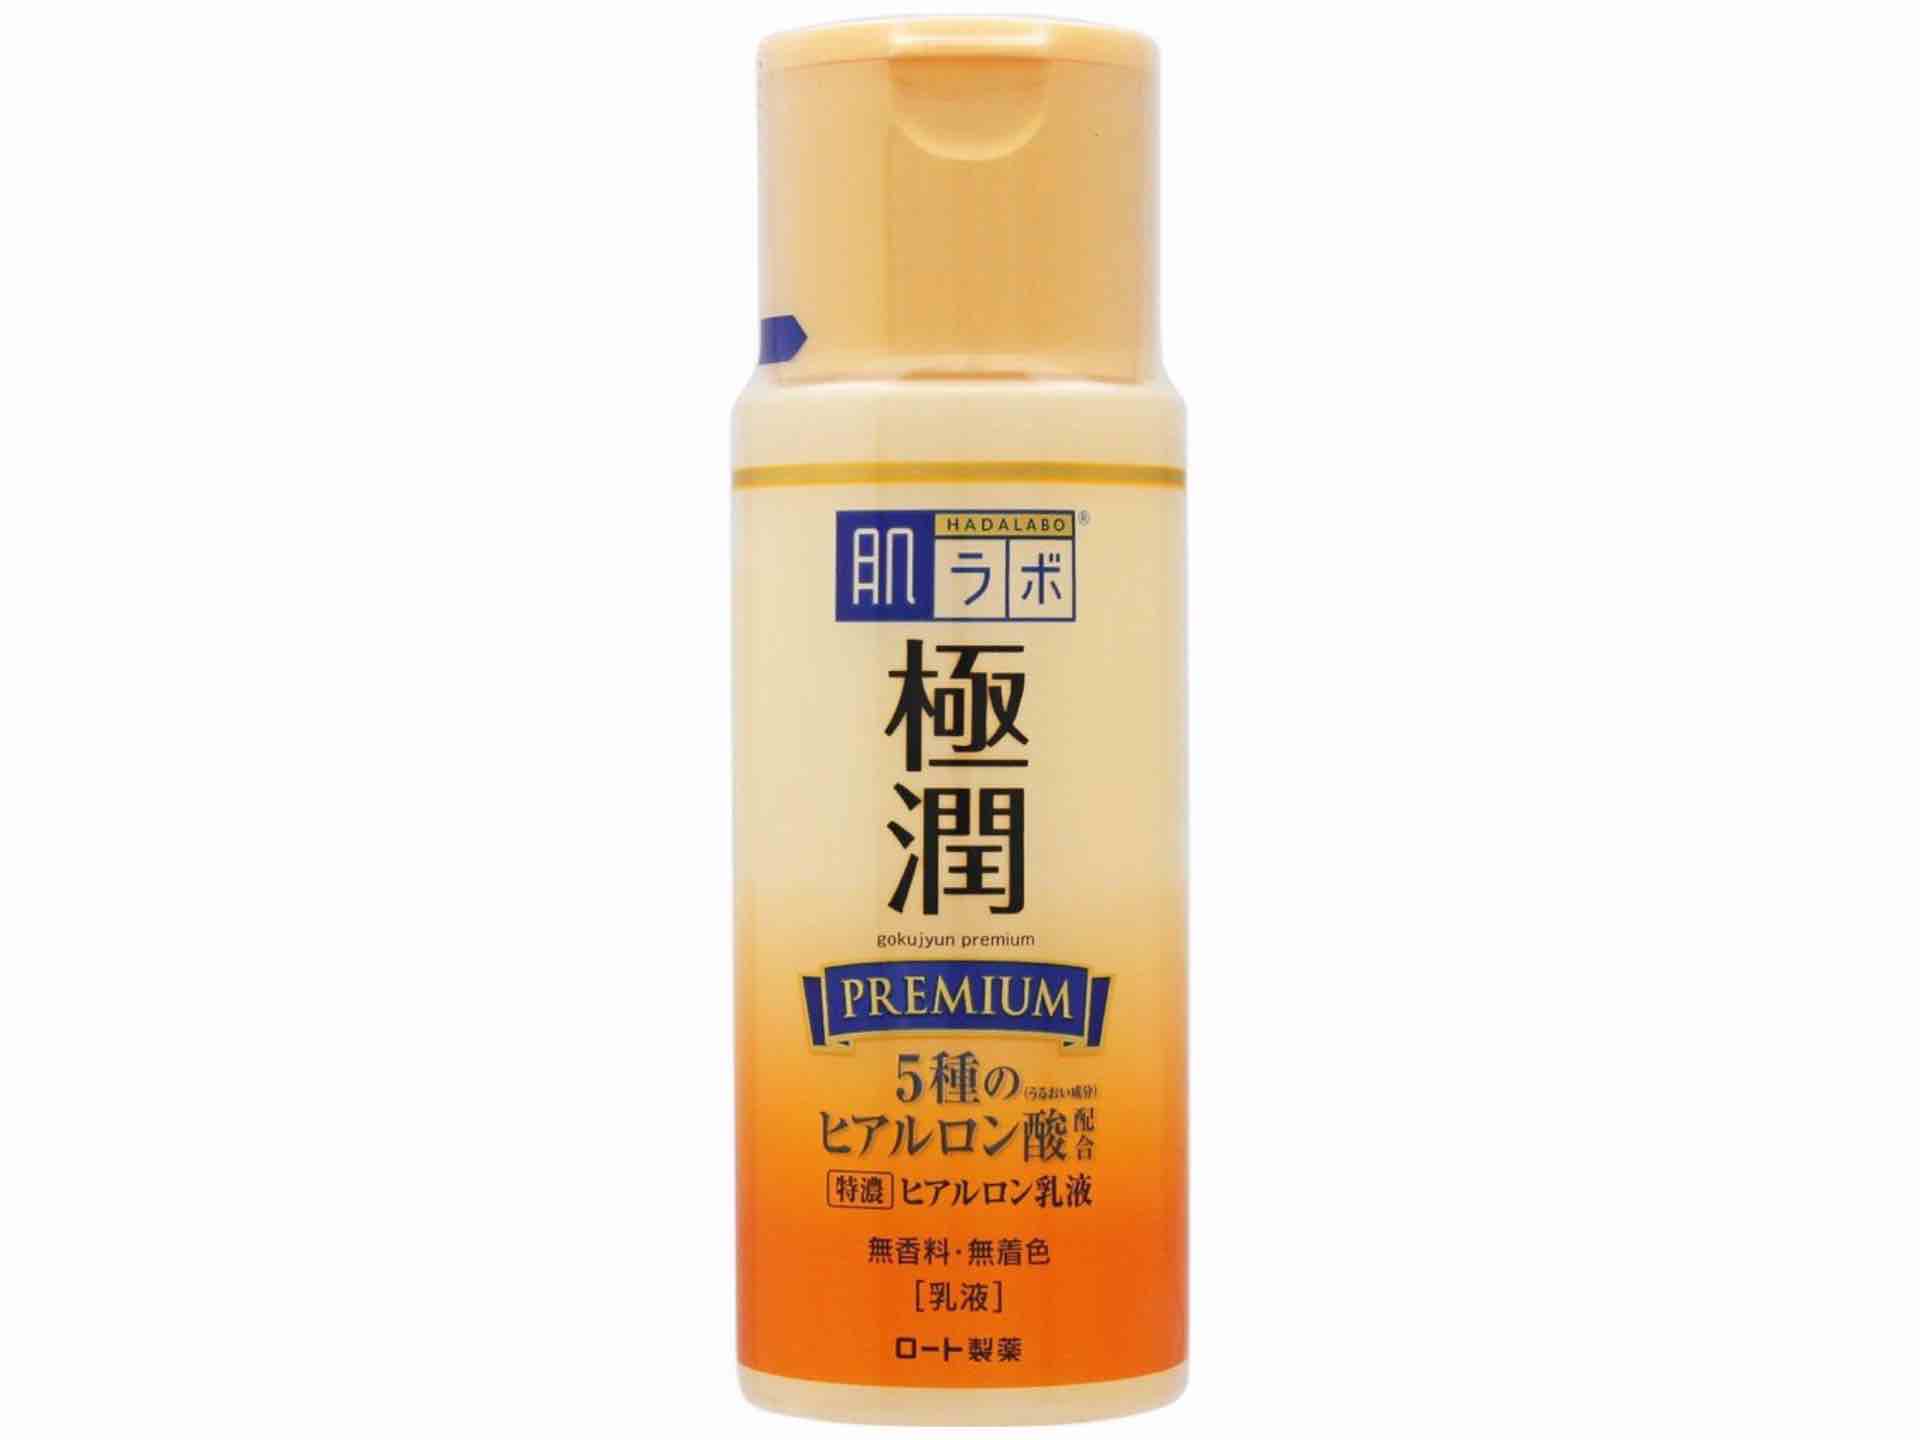 Hada Labo “Premium” hyaluronic solution for ultimate skin hydration. ($15 for single 170mL bottle; $26 for a pack of two)